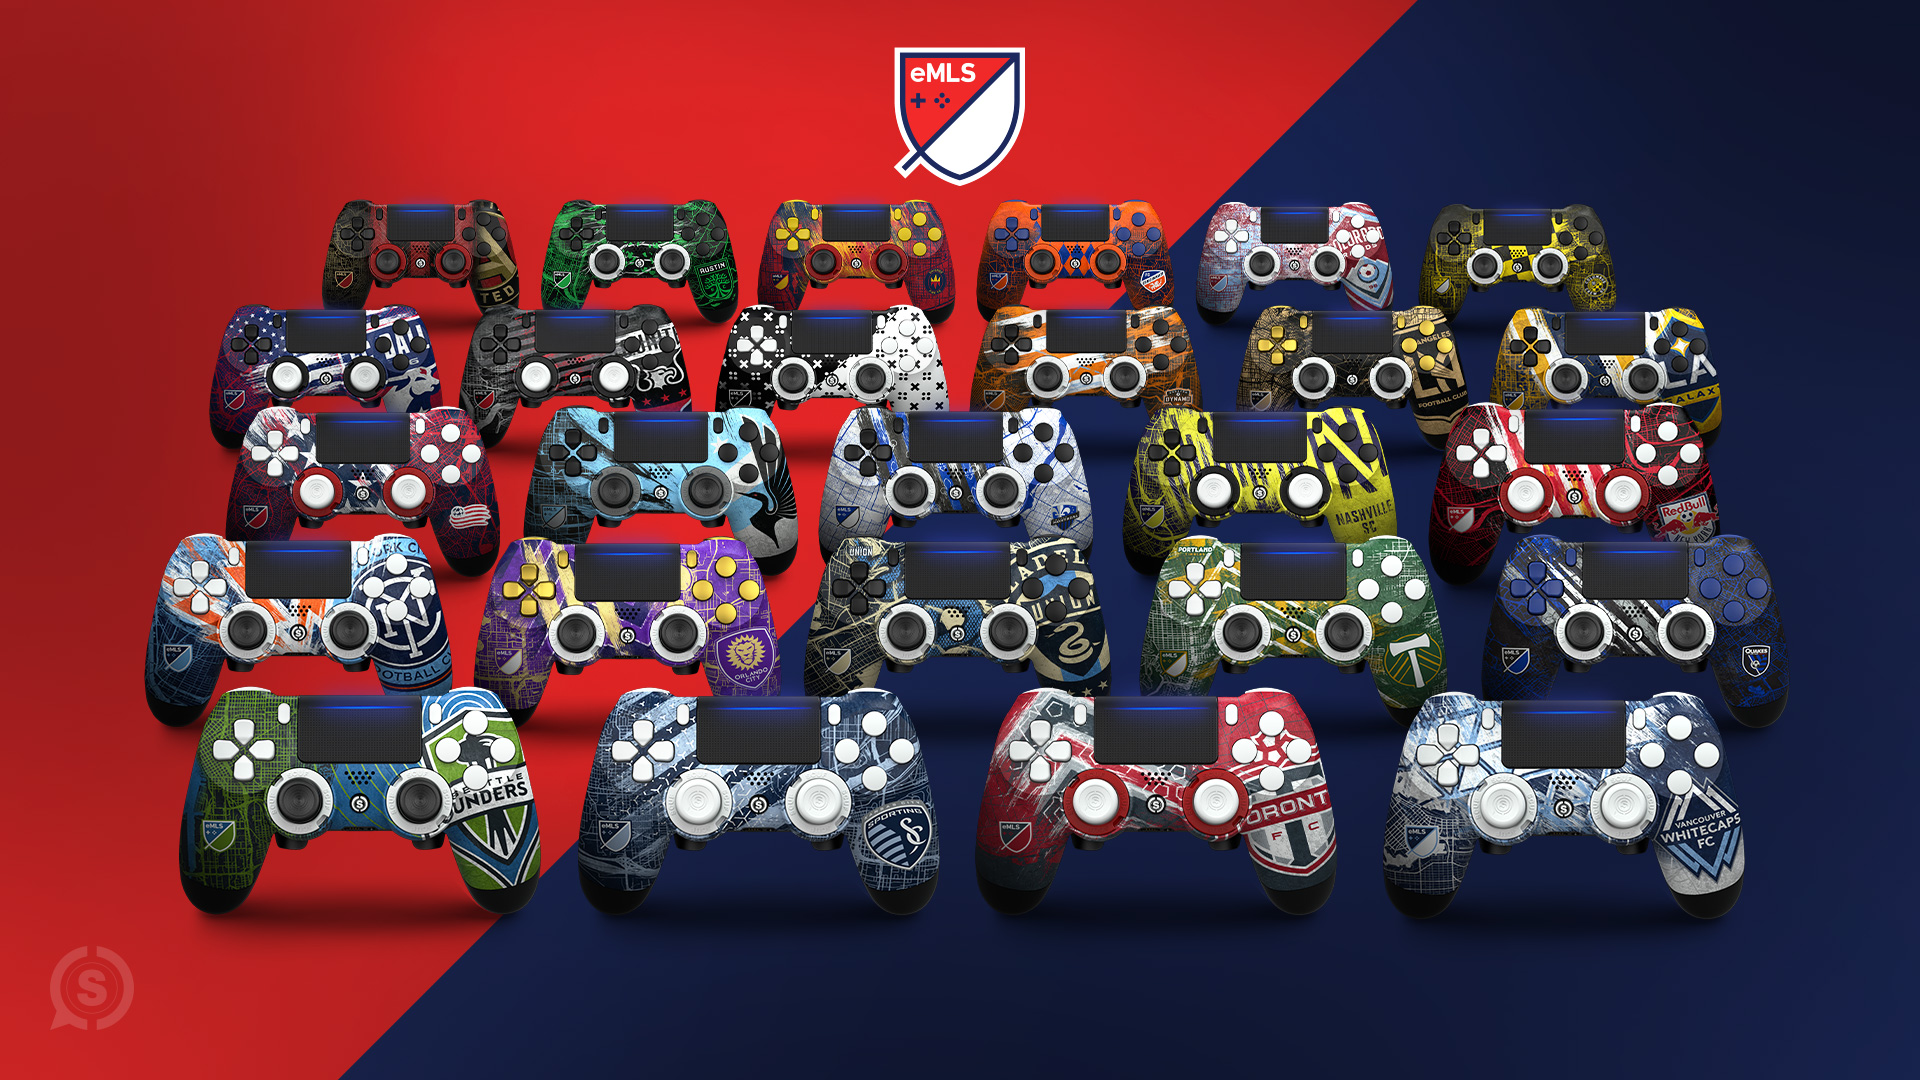 SCUF eMLS Controllers for Playstation